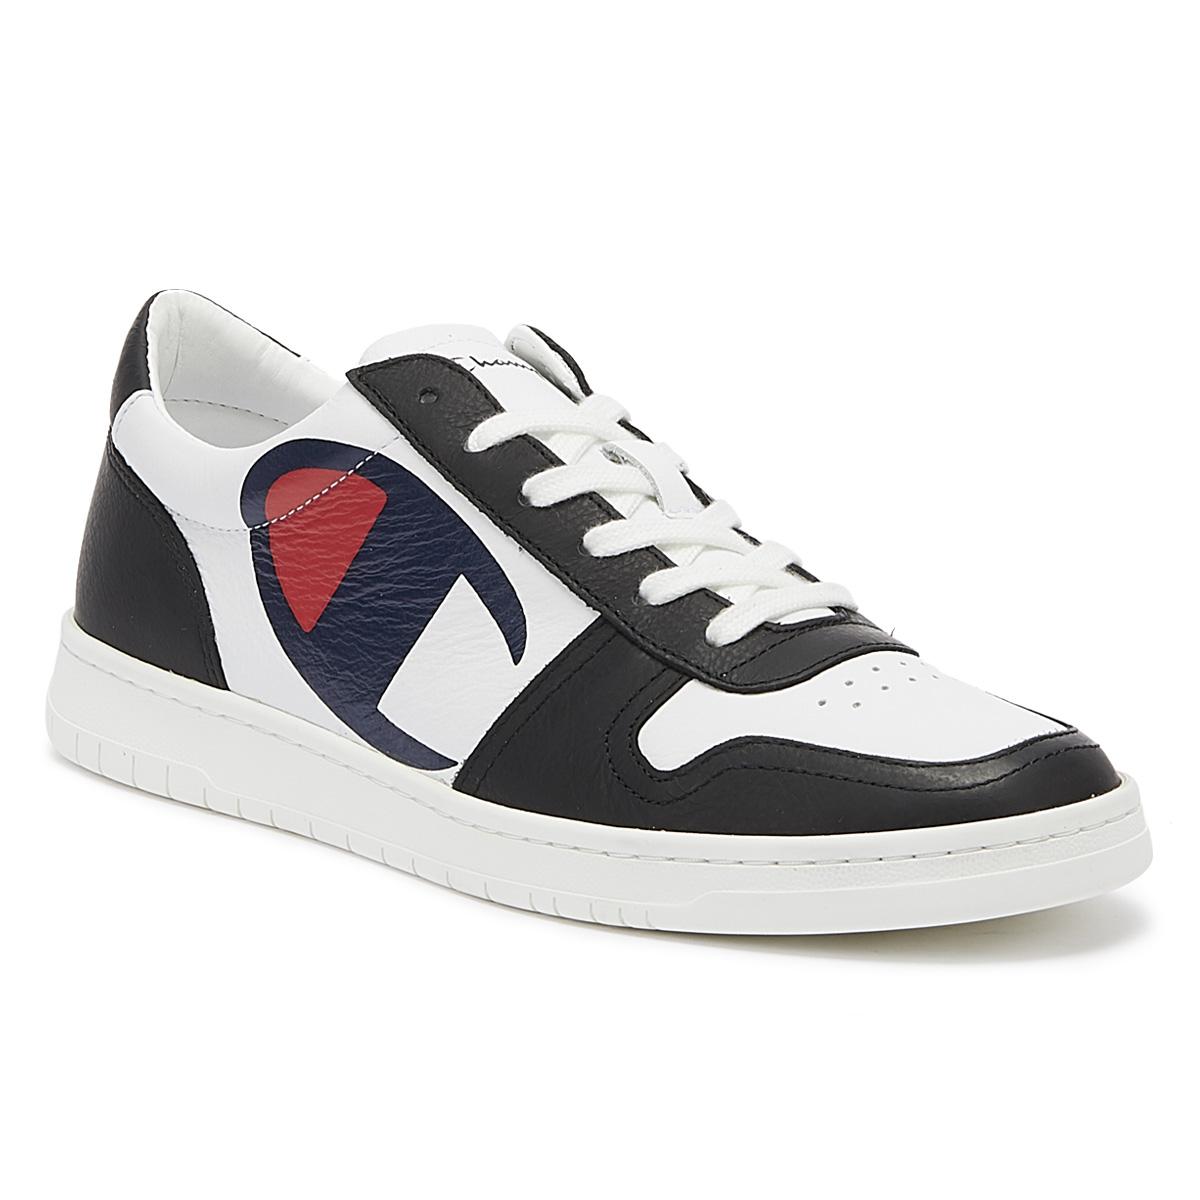 Champion Leather 919 Roch Low Mens White / Black Trainers for Men - Lyst